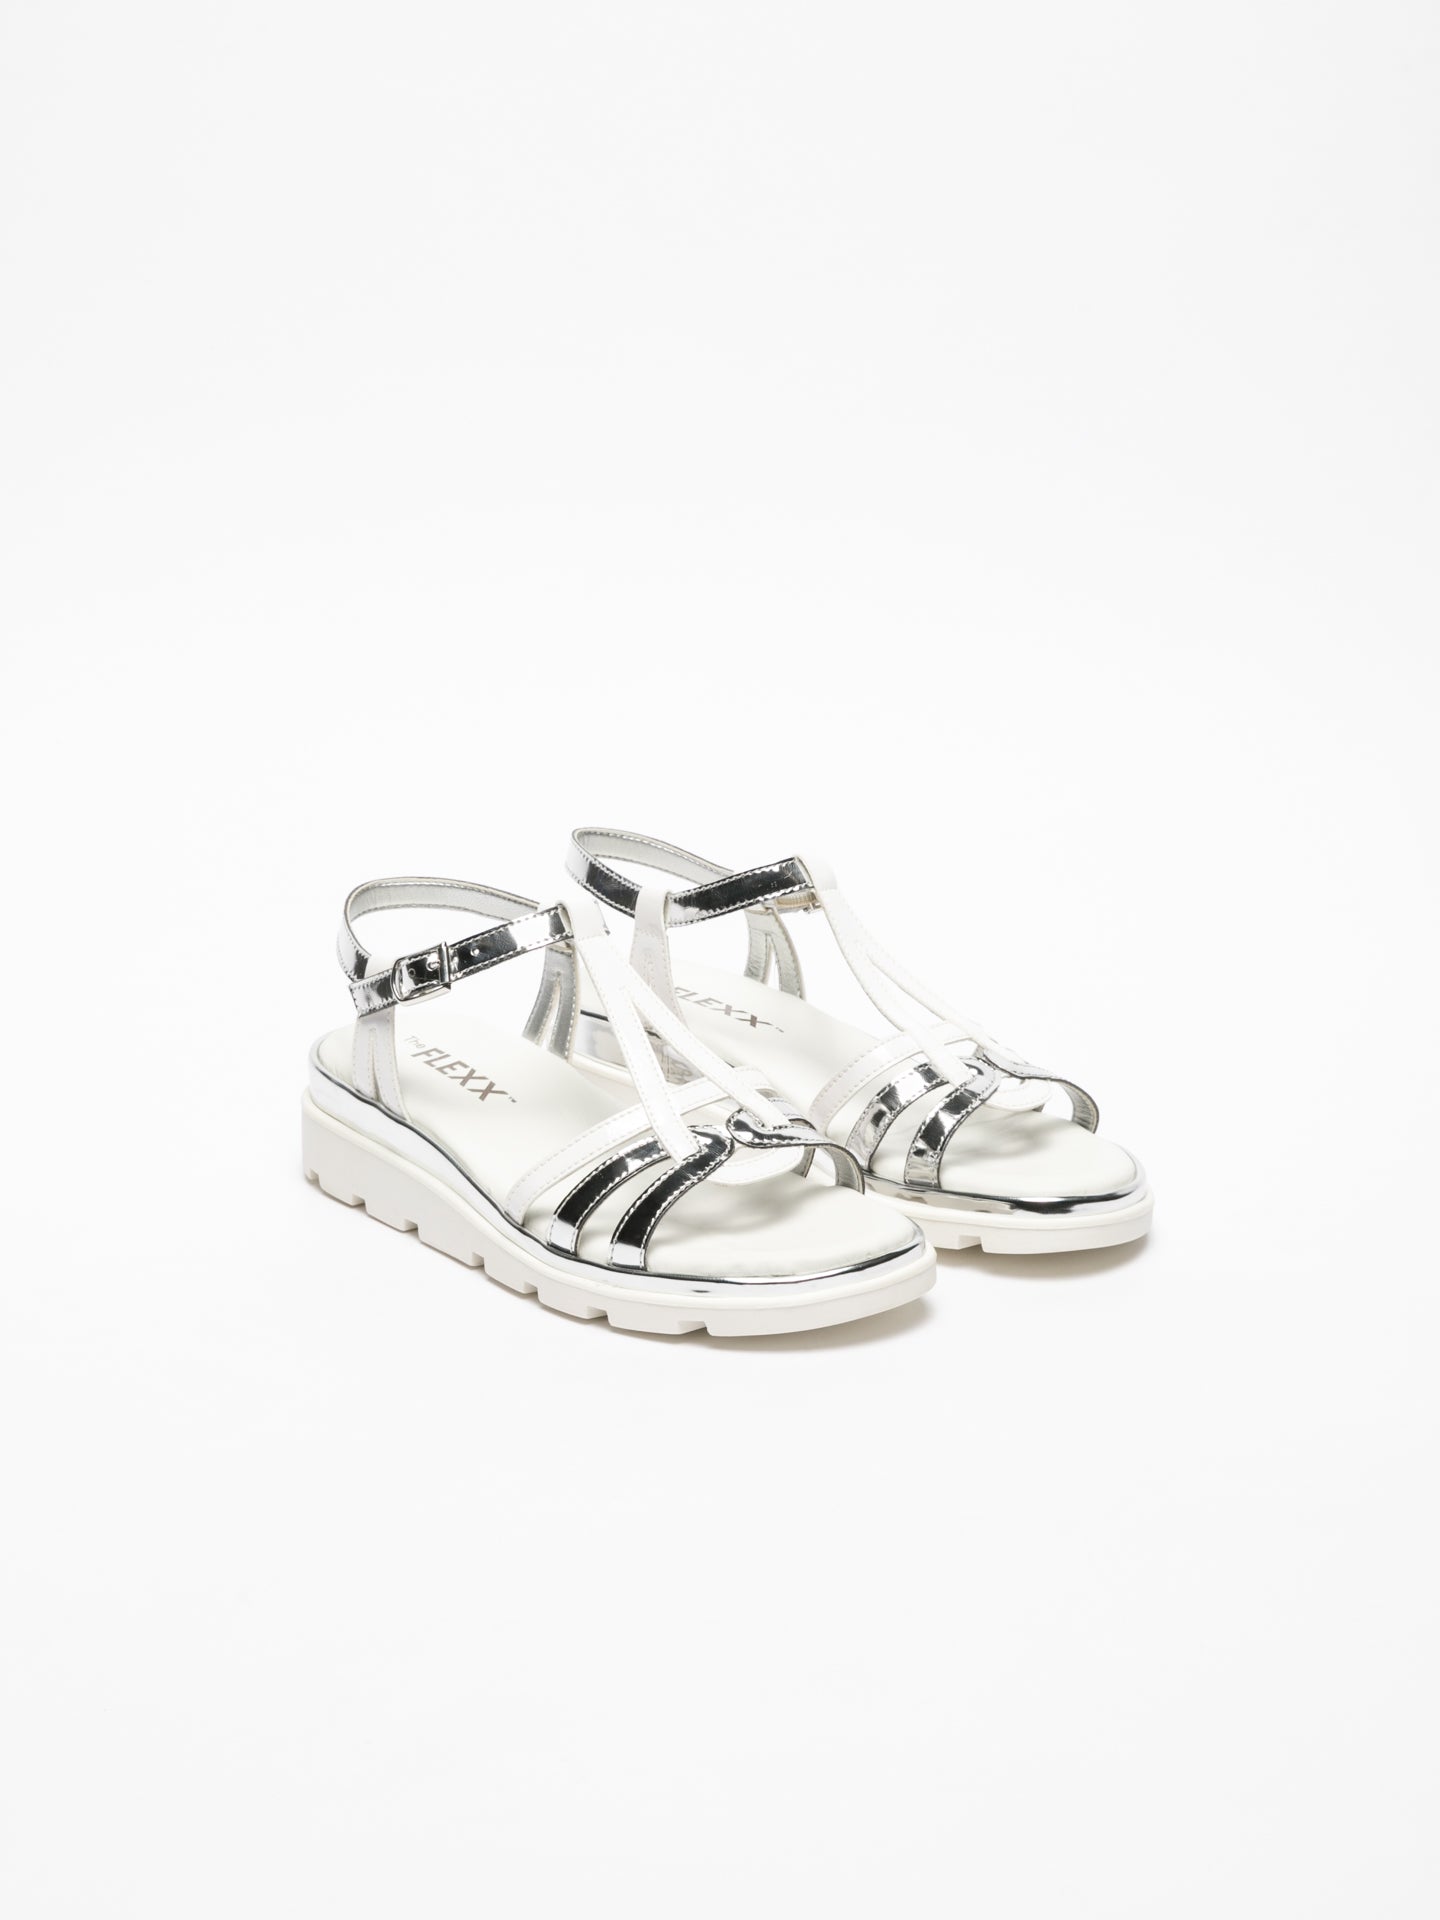 The Flexx Silver Sling-Back Sandals